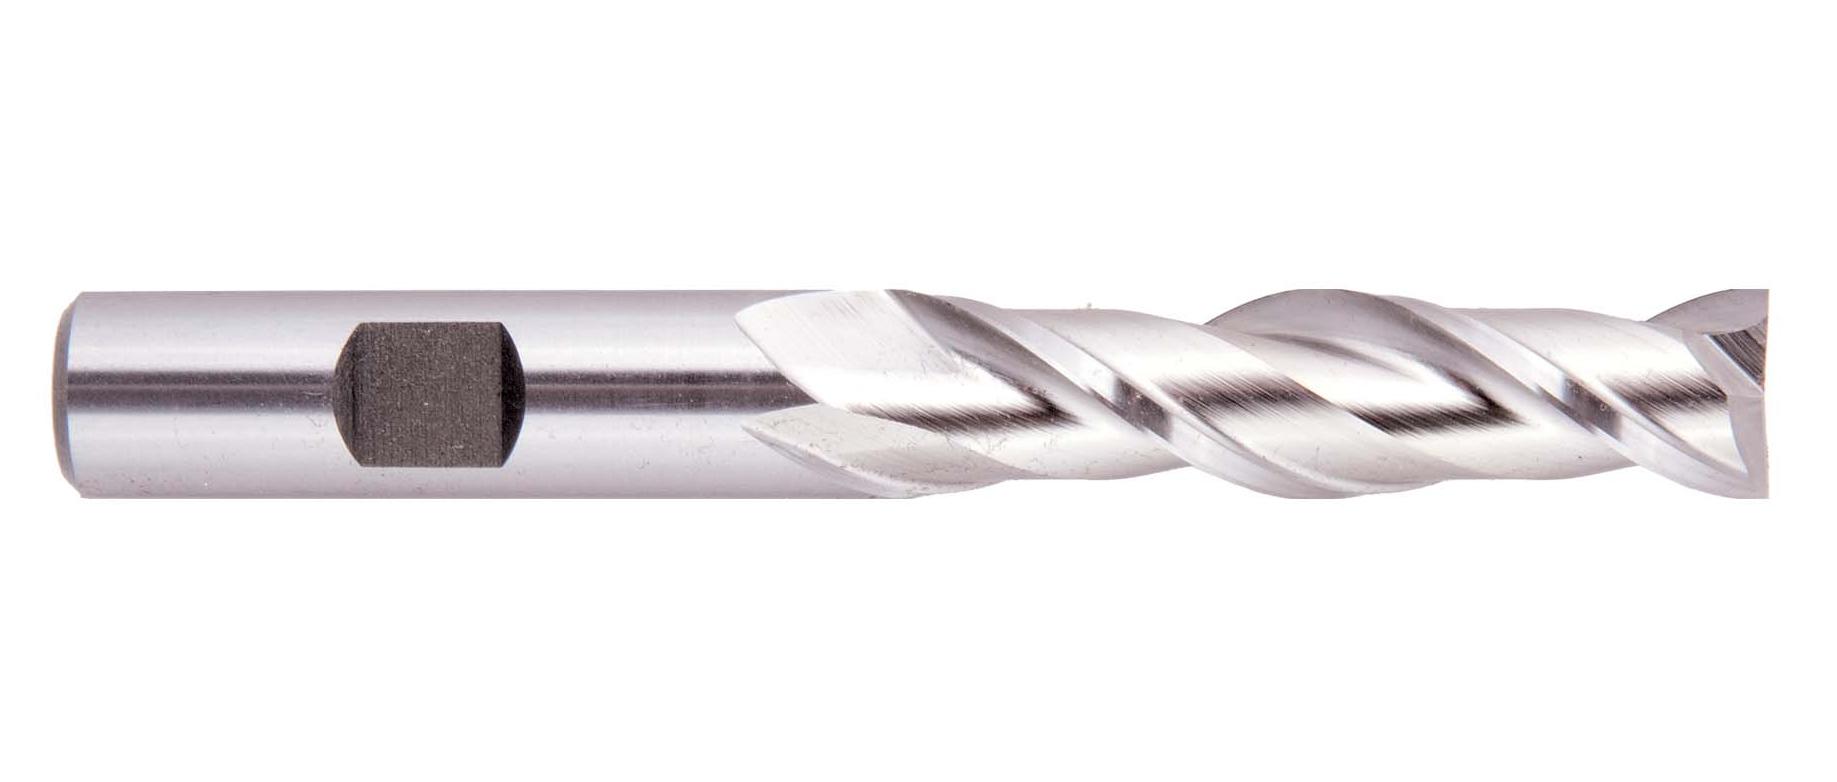 Drillco 5000A Series High-Speed Steel Regular Length Finishing Center Cutting End Mill 2-5/16 Length 2 Flute 3/8 Shank Diameter Square Nose End 30 Degrees Helix 7/16 Cutting Length Uncoated Bright 3/16 Cutting Diameter Finish 